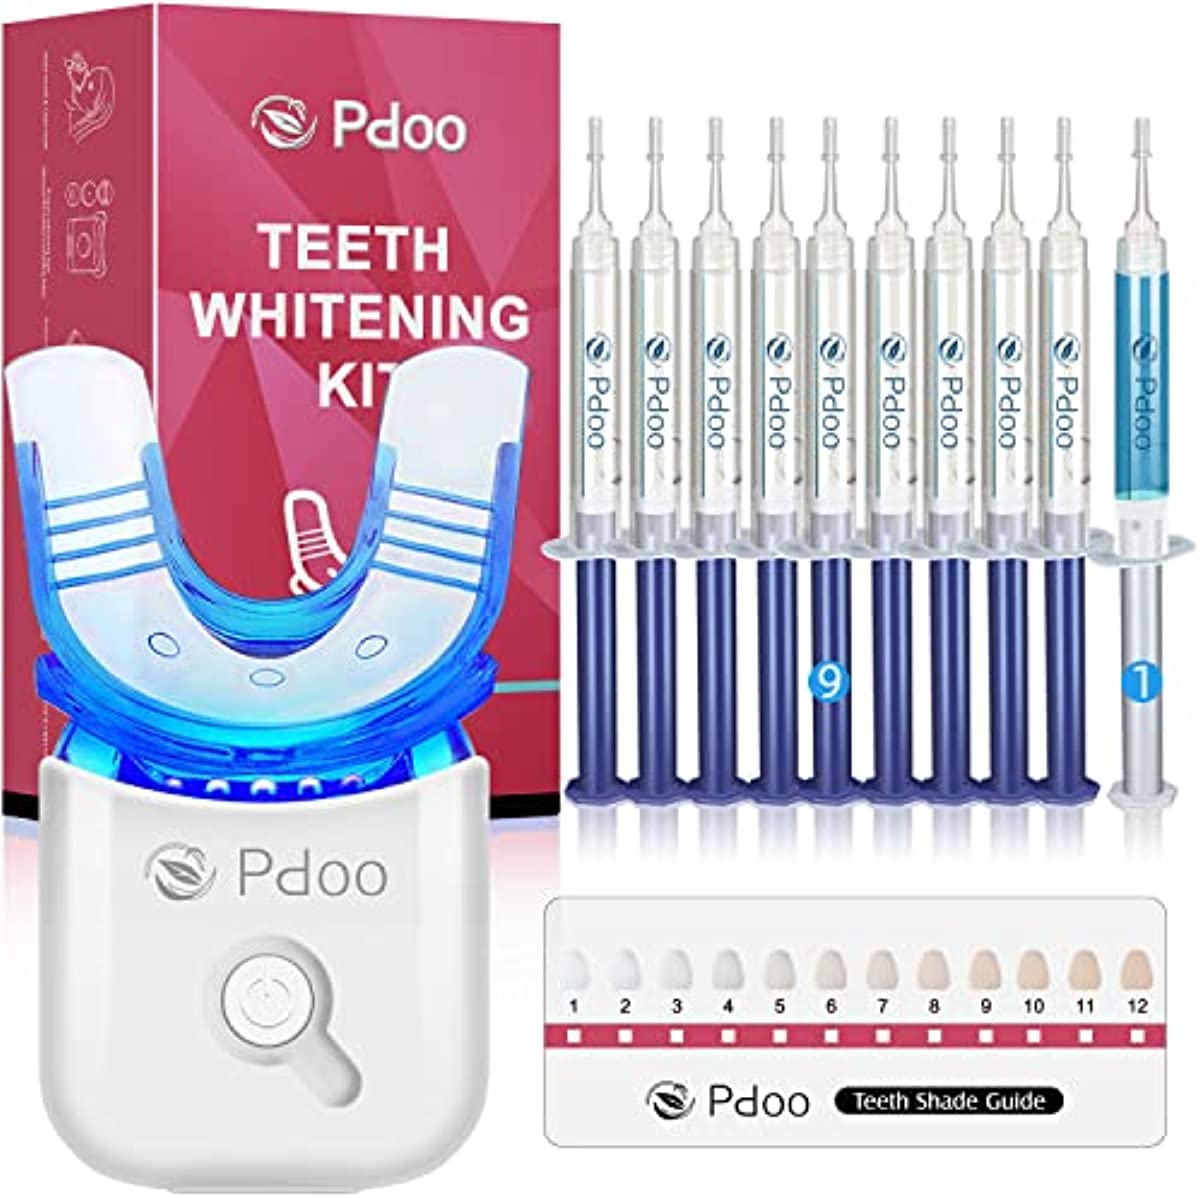 Teeth Whitening Kit with LED Lights Tray for Sensitive Teeth, 10x Whitening Pen Gel, Teeth Whitener at Home, Pain Free and Enamel Safe, Up to 1-9 Shades Whiter in 1-2 Weeks, 2-3X Faster Than Strips